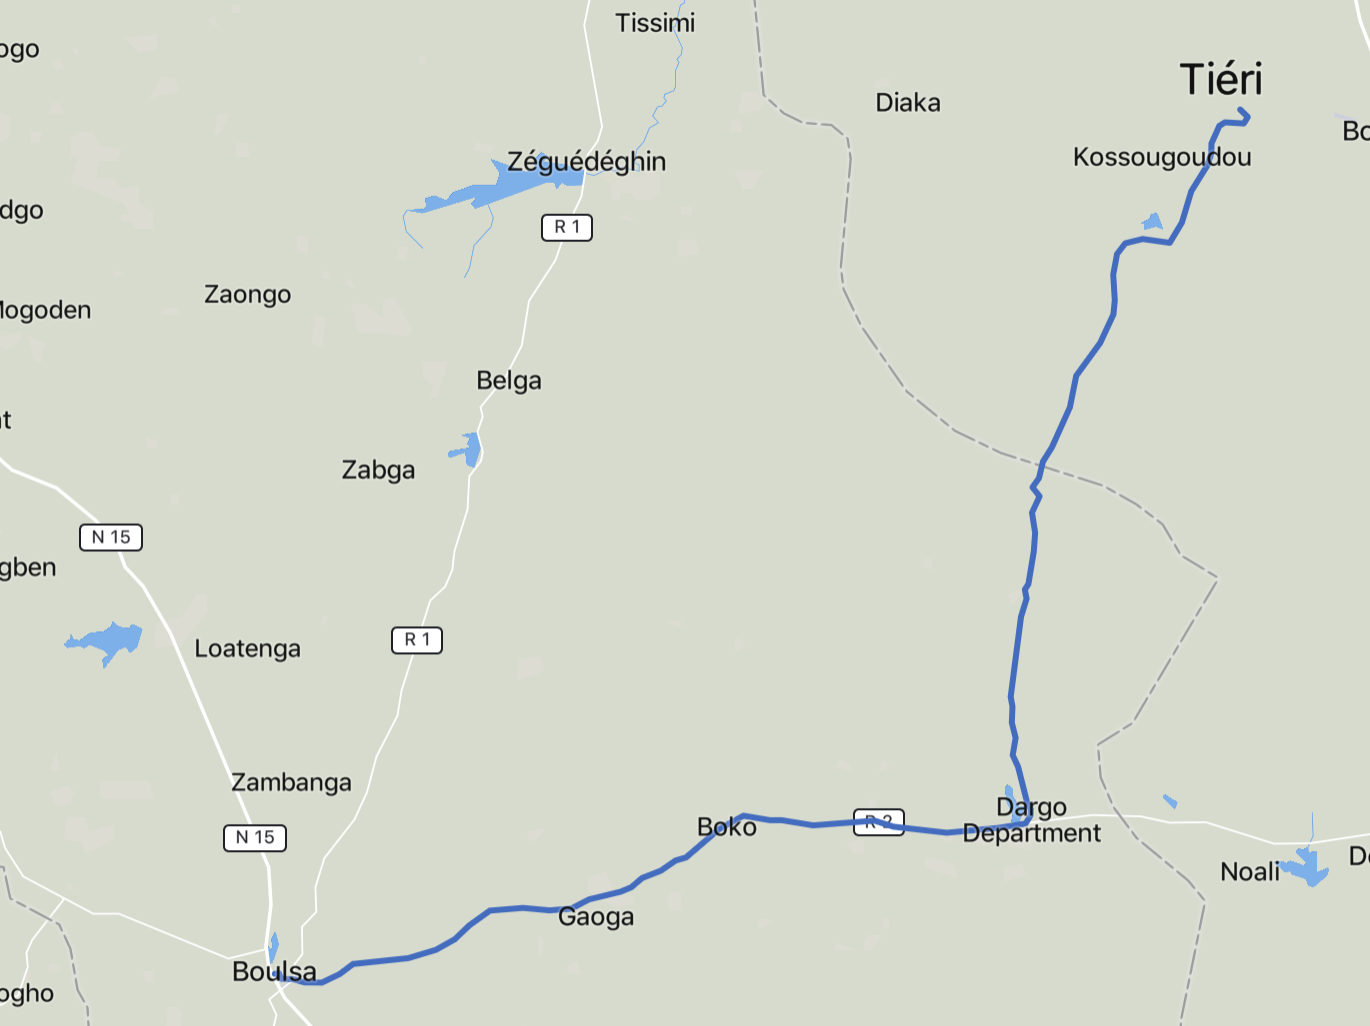 Thiery on the N18 is only 67km away from Boulsa which sits on the N15 road in neighbouring Namentenga Province.